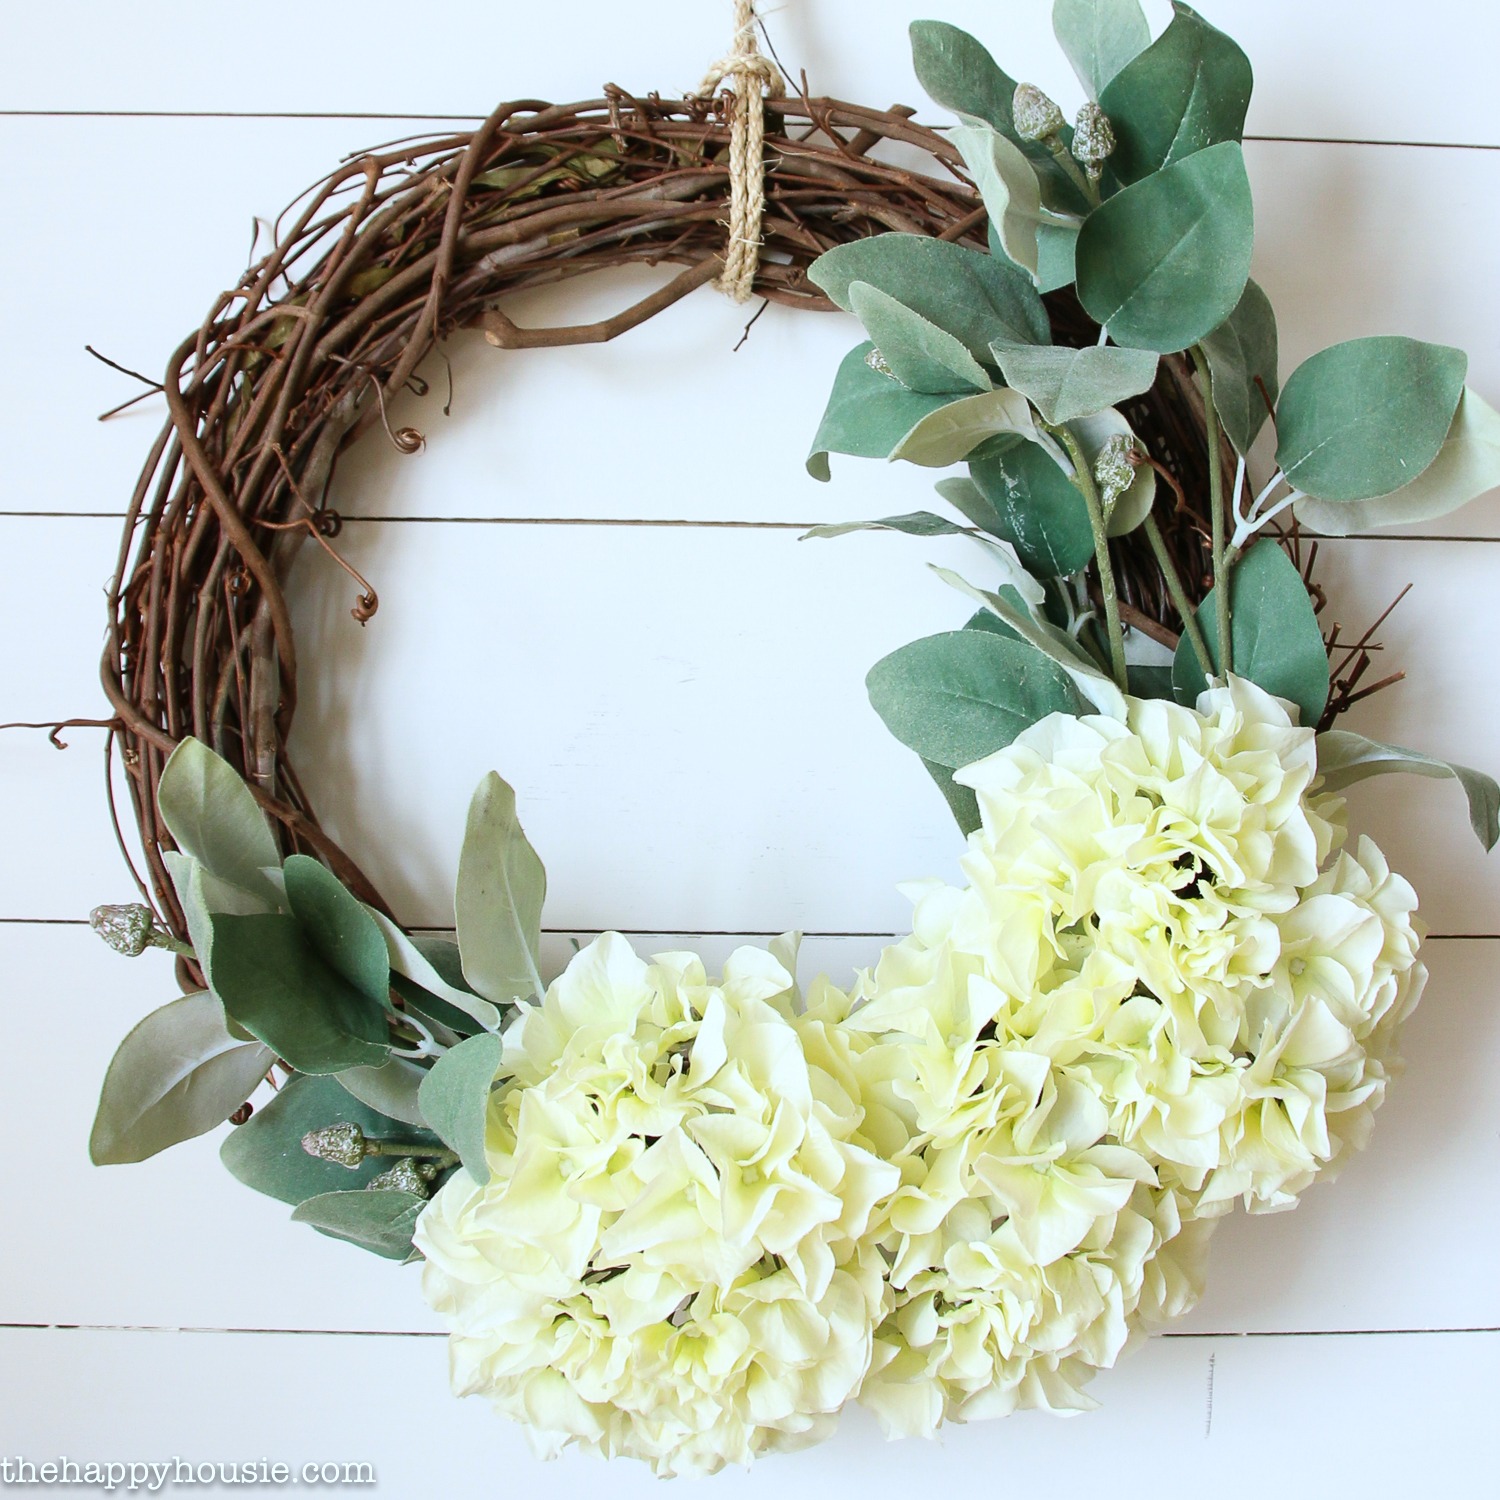 The simple wreath hanging on a wooden planked wall.